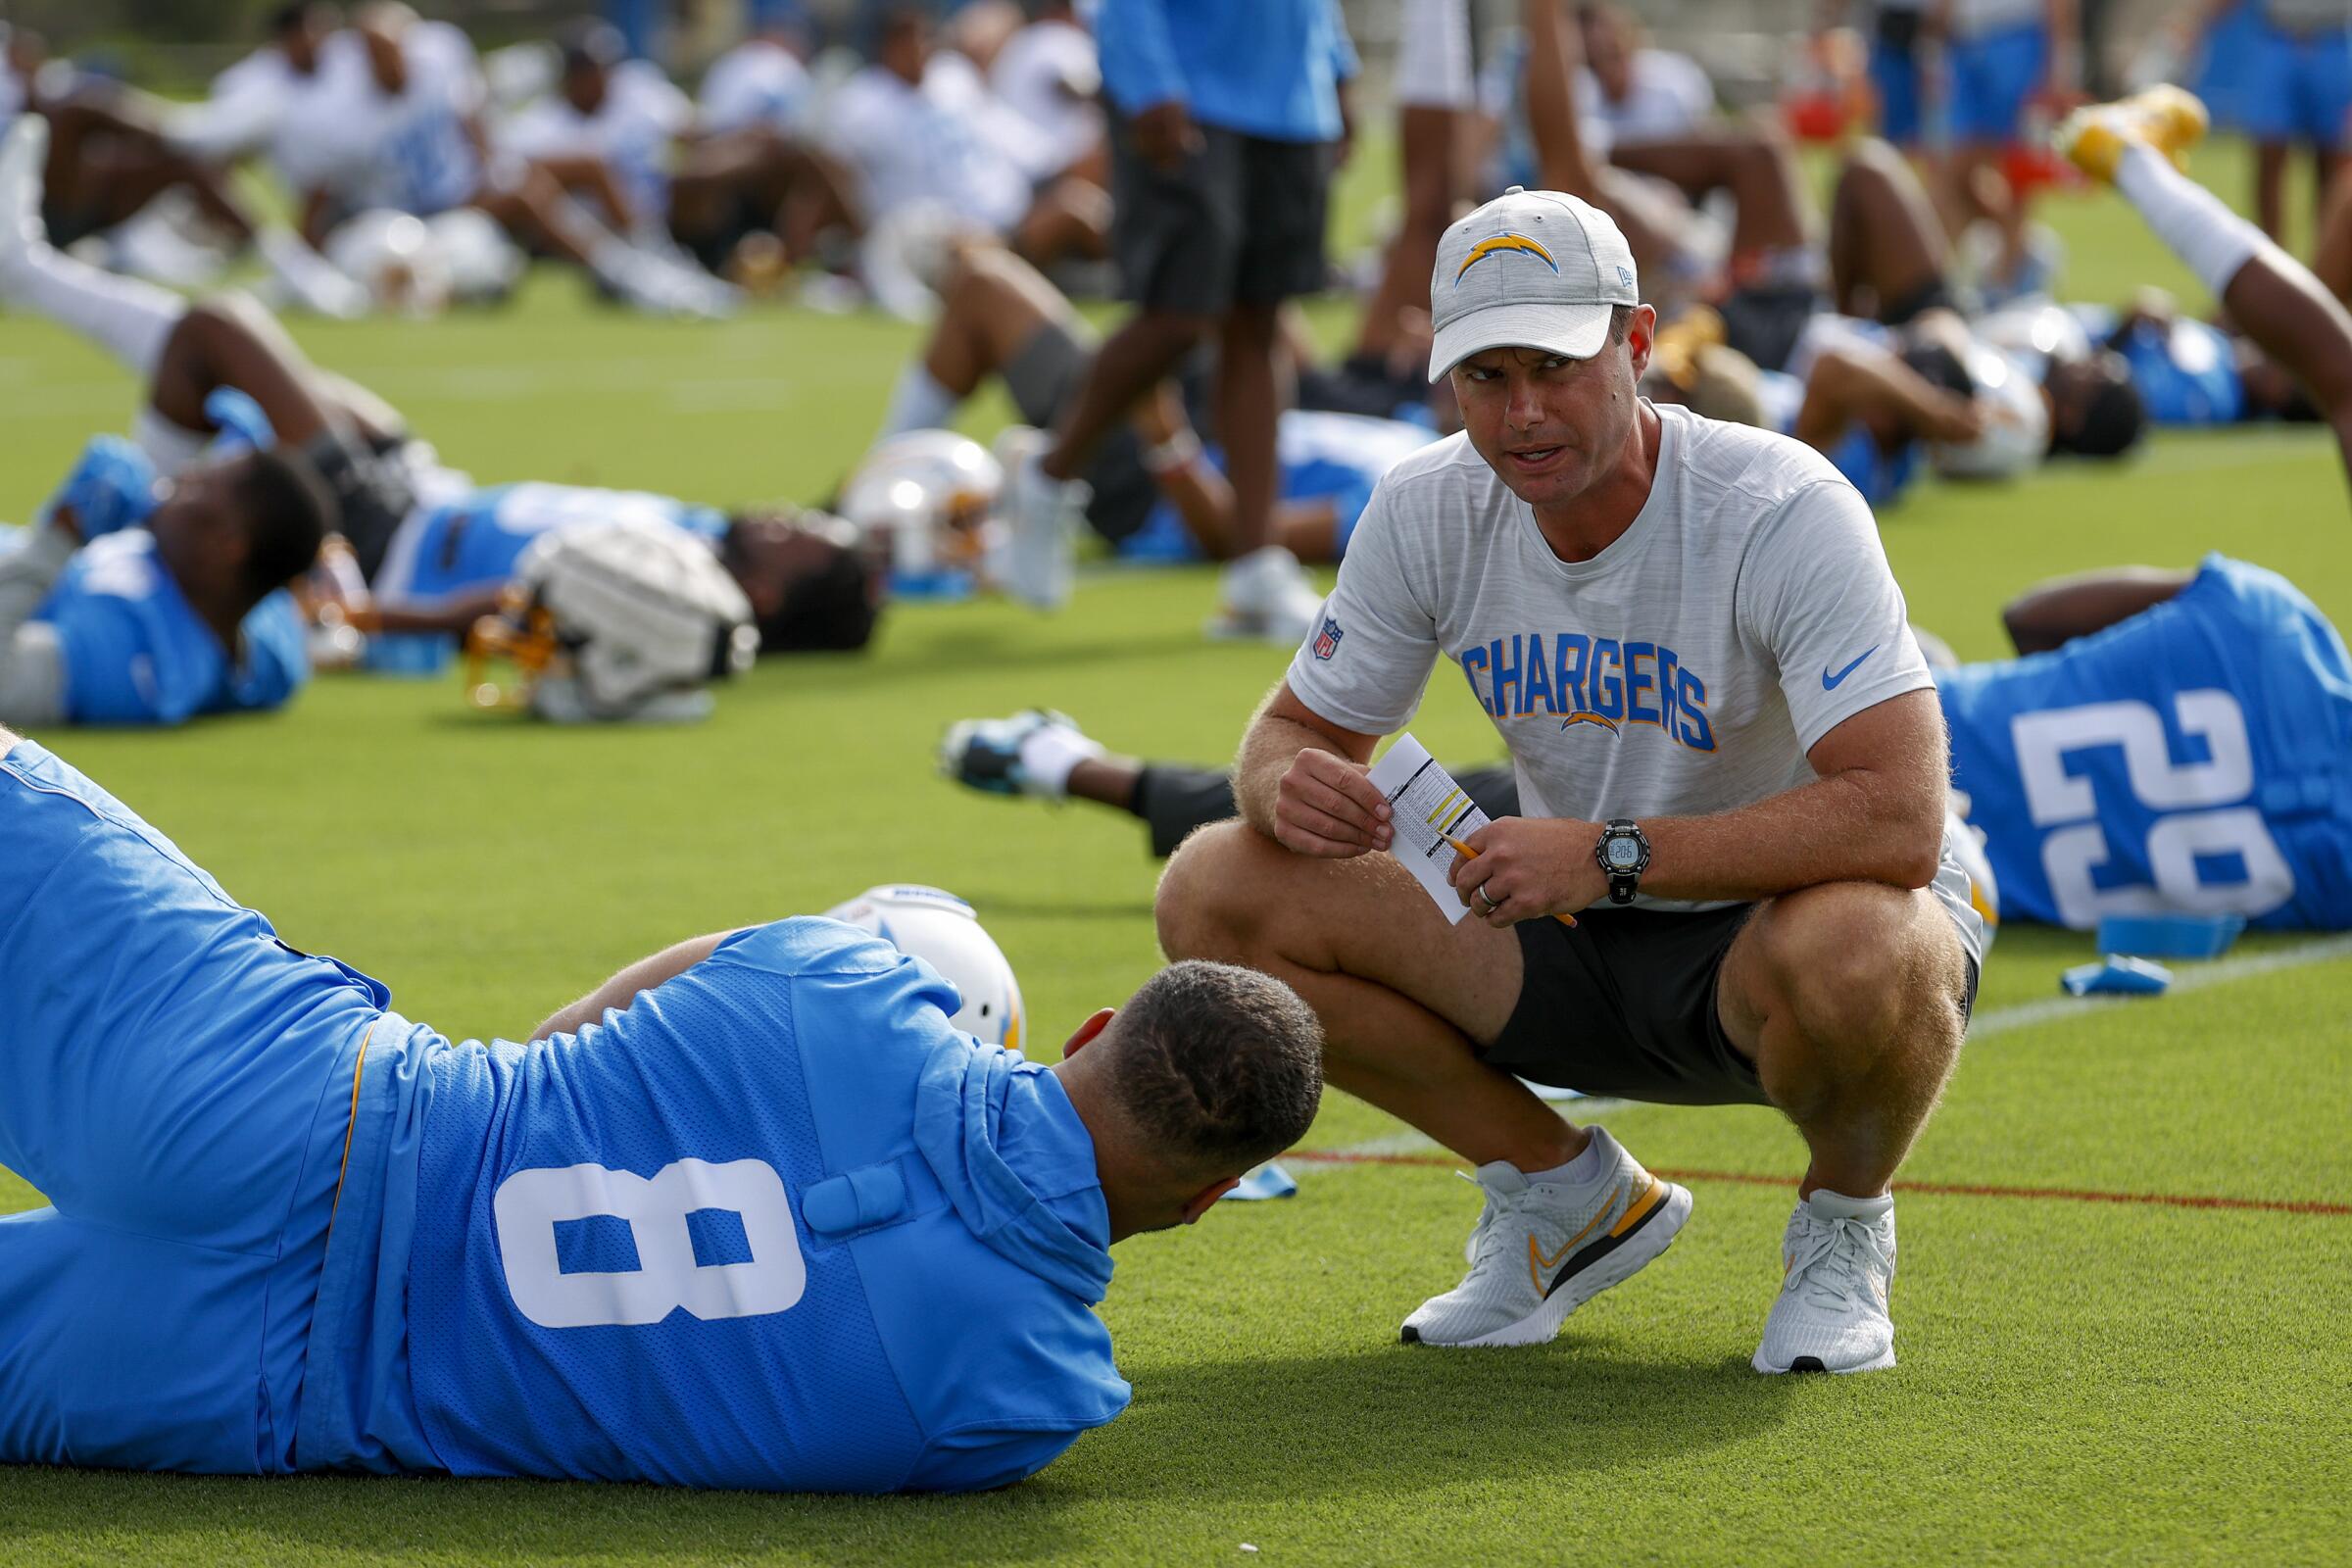  Chargers head coach Brandon Staley, right, talks to outside linebacker Kyle Van Noy (8) during camp.